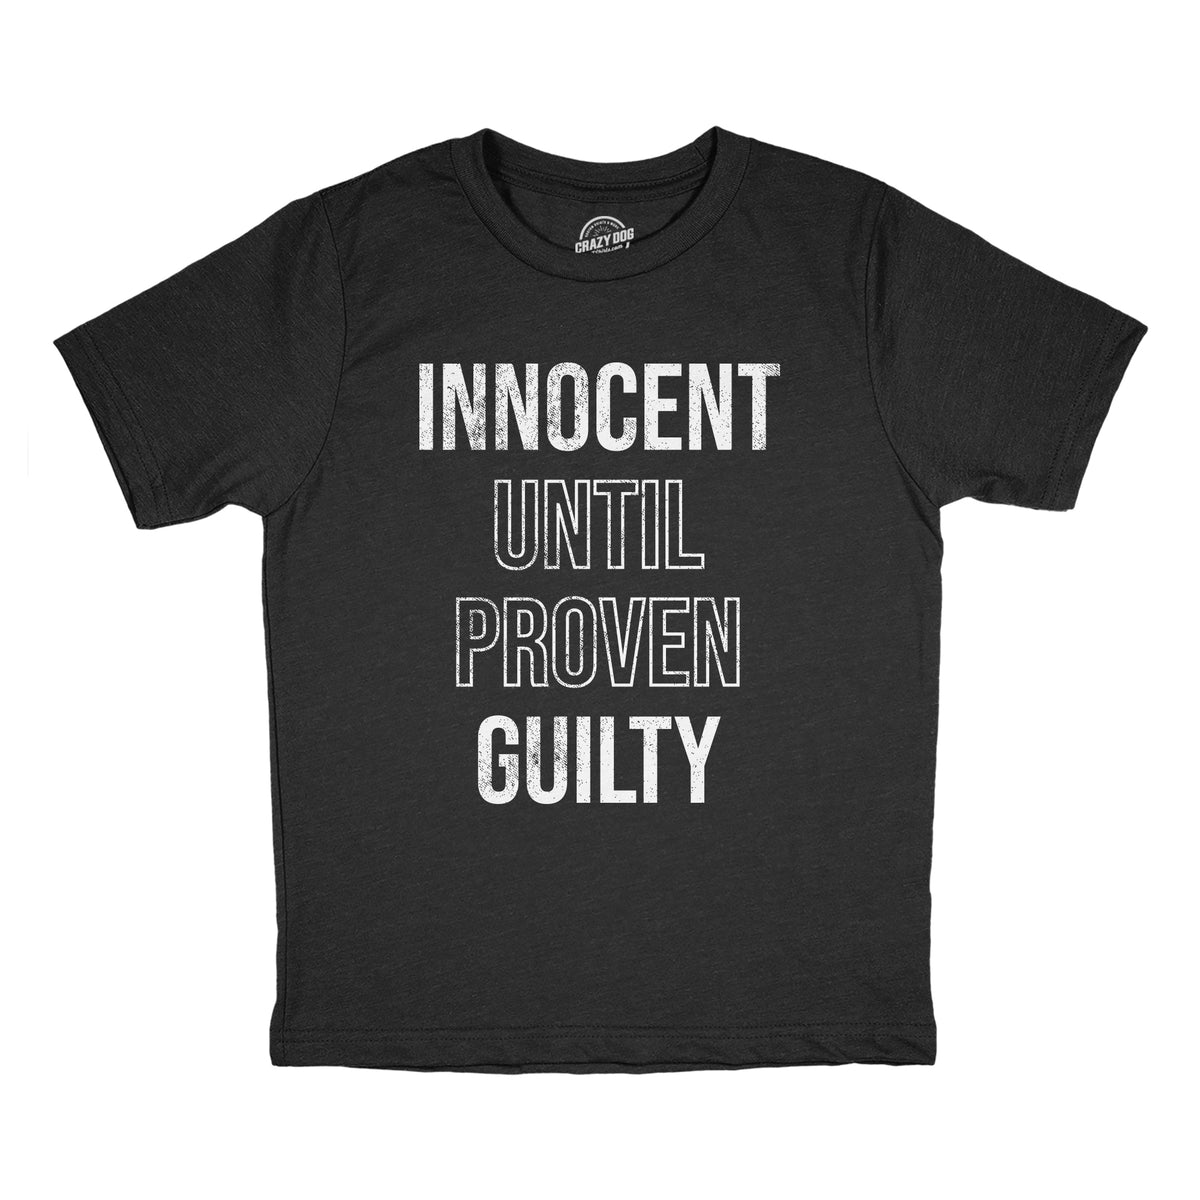 Funny Heather Black - INNOCENT Innocent Until Proven Guilty Youth T Shirt Nerdy sarcastic Tee